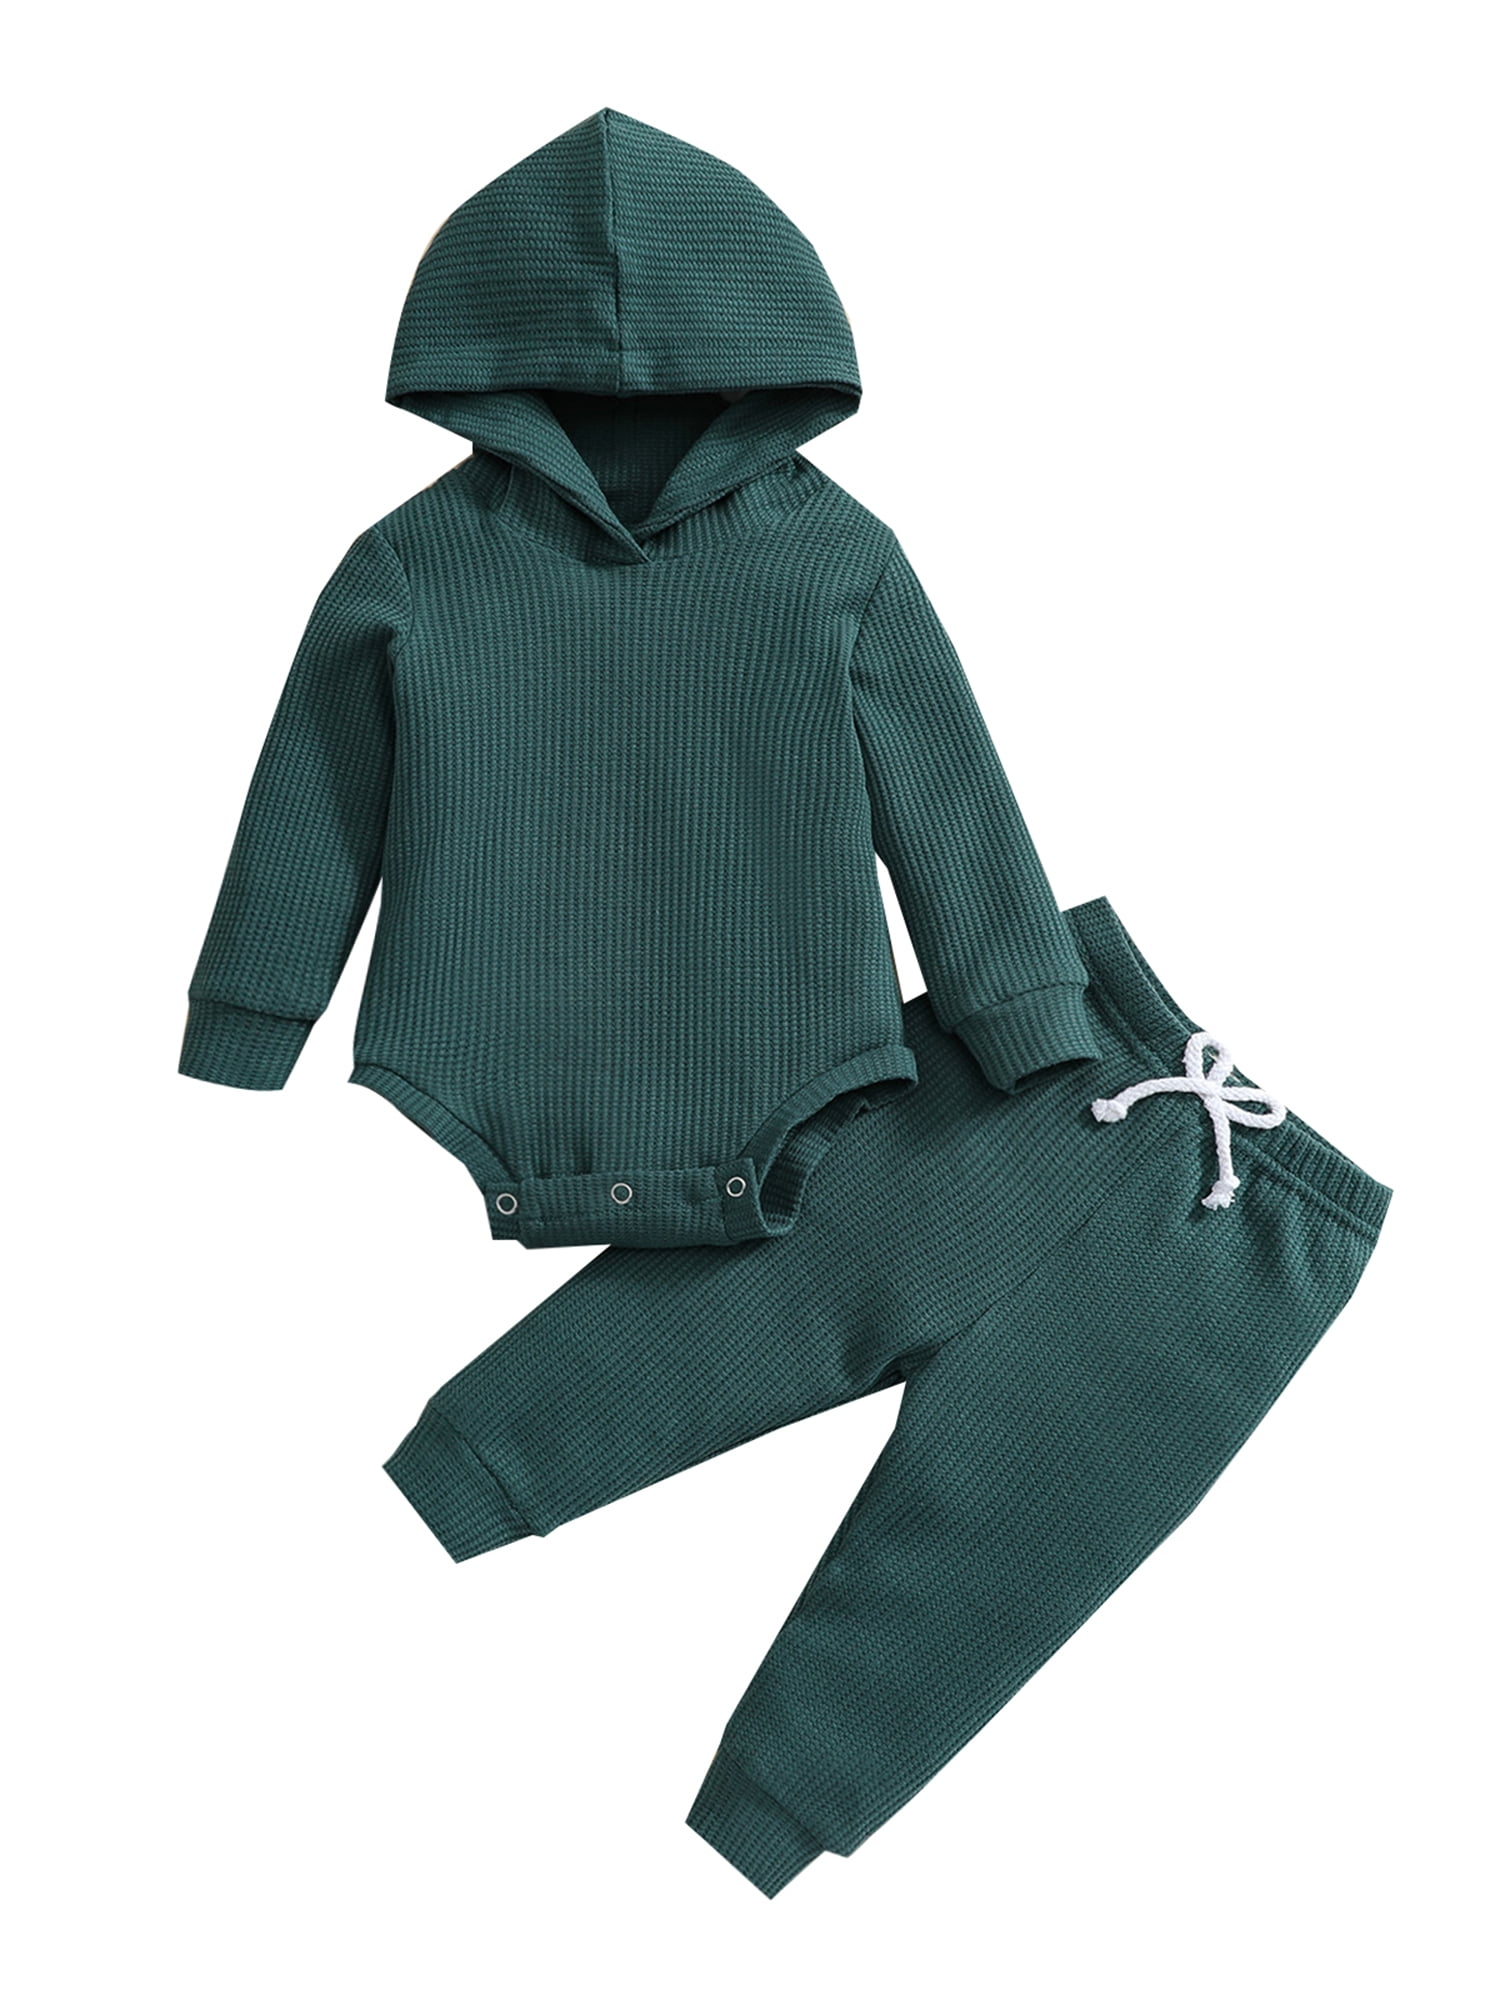 Details about   Baby Girl Hoodie Casual Cute Cat Print Hooded Top Pants 2Pcs Set Outfits 3-24M 